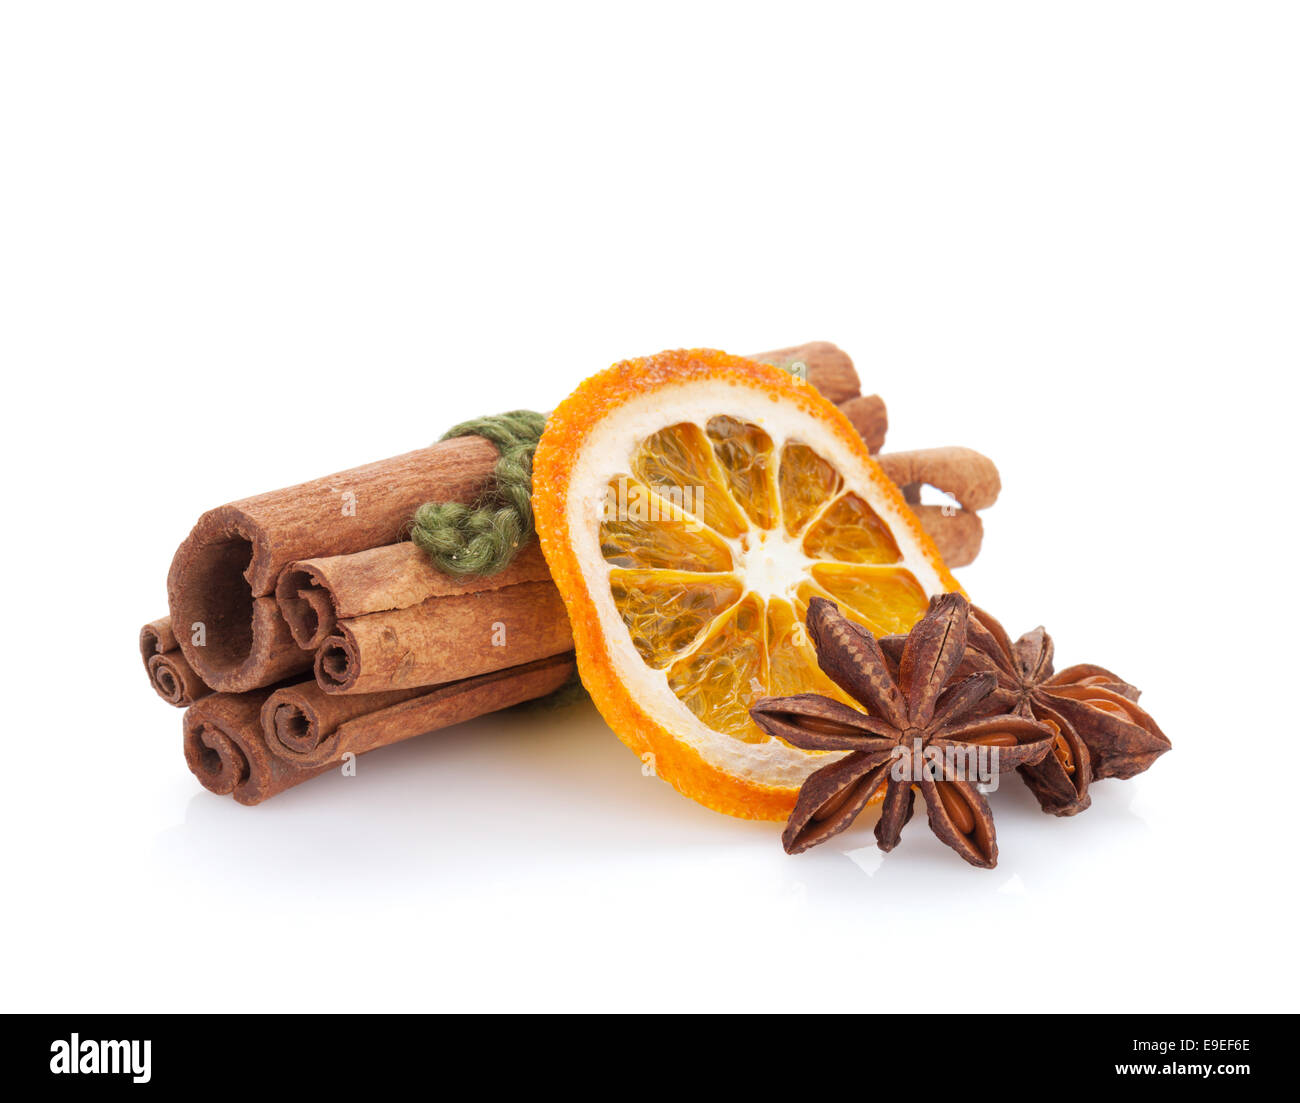 Christmas food decoration spices. Isolated on white background Stock Photo